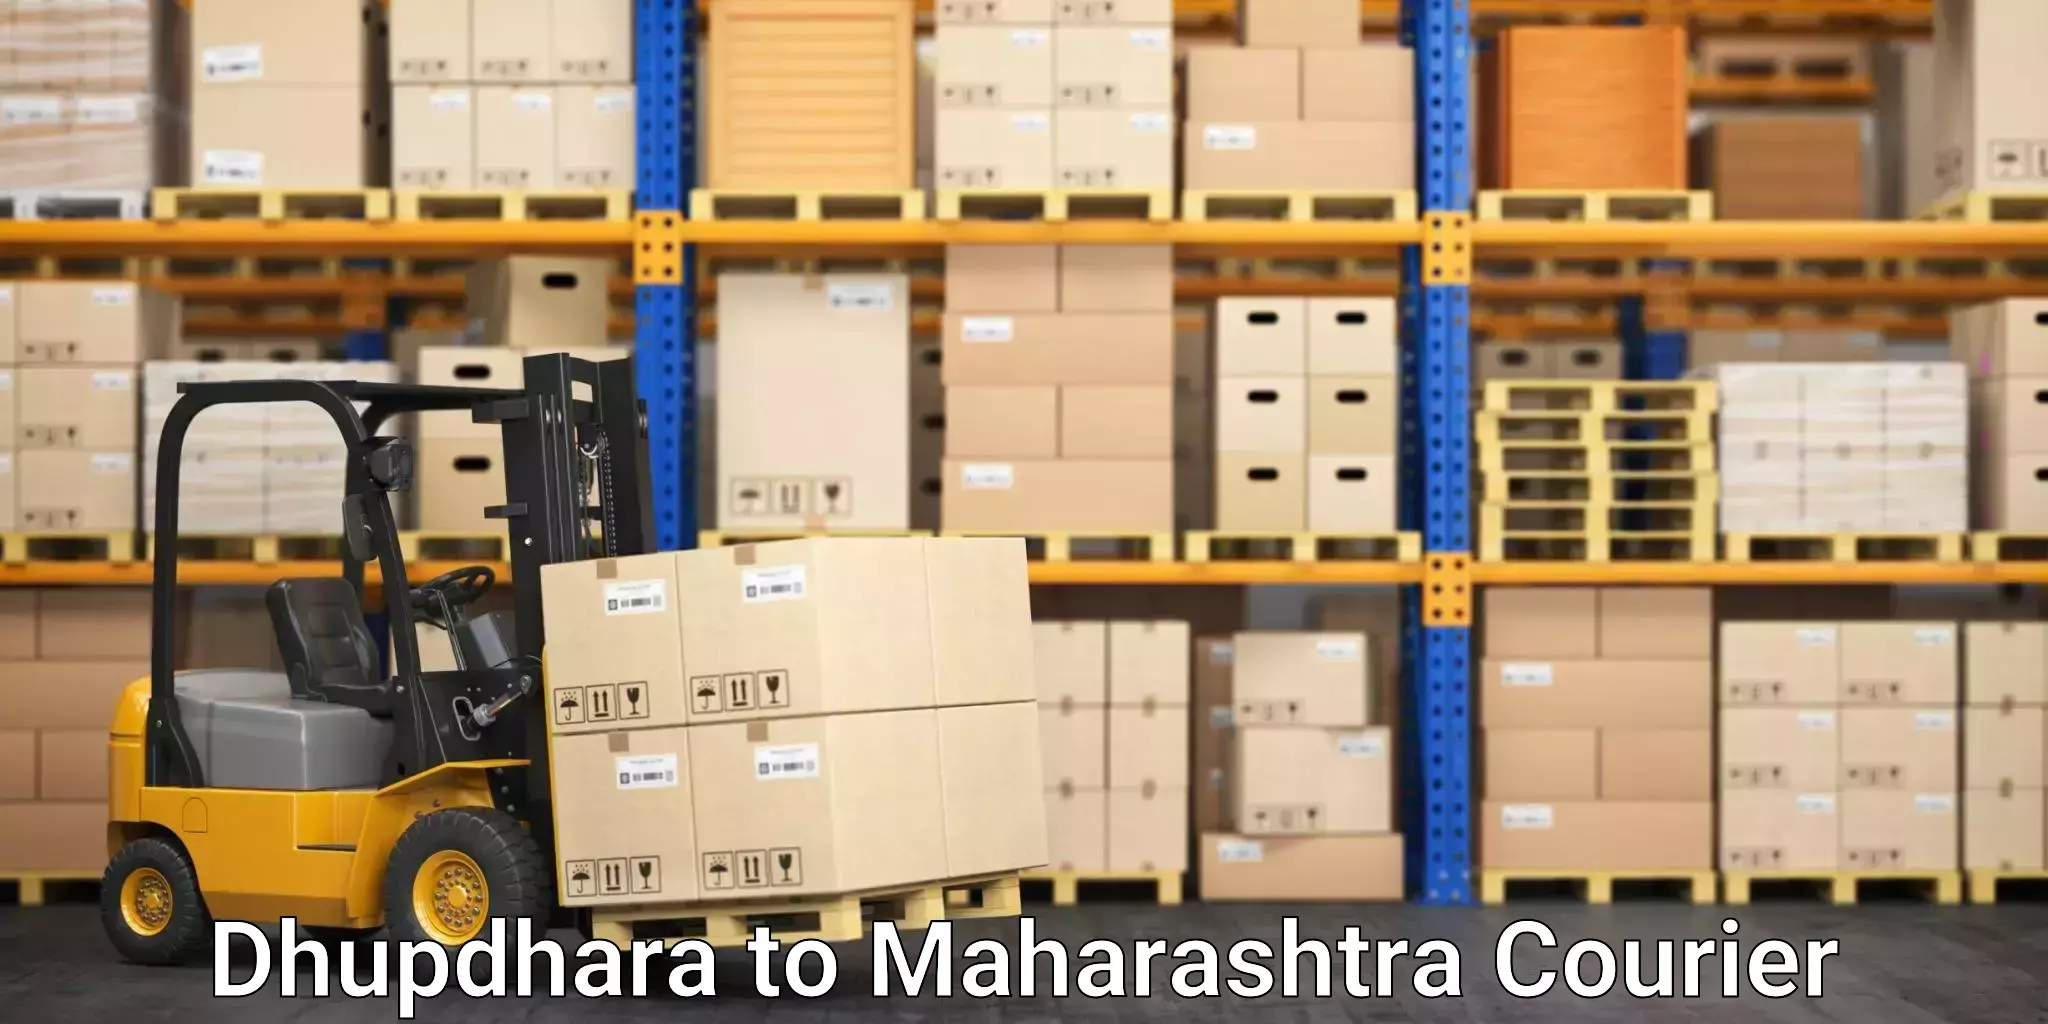 Courier service efficiency in Dhupdhara to Worli